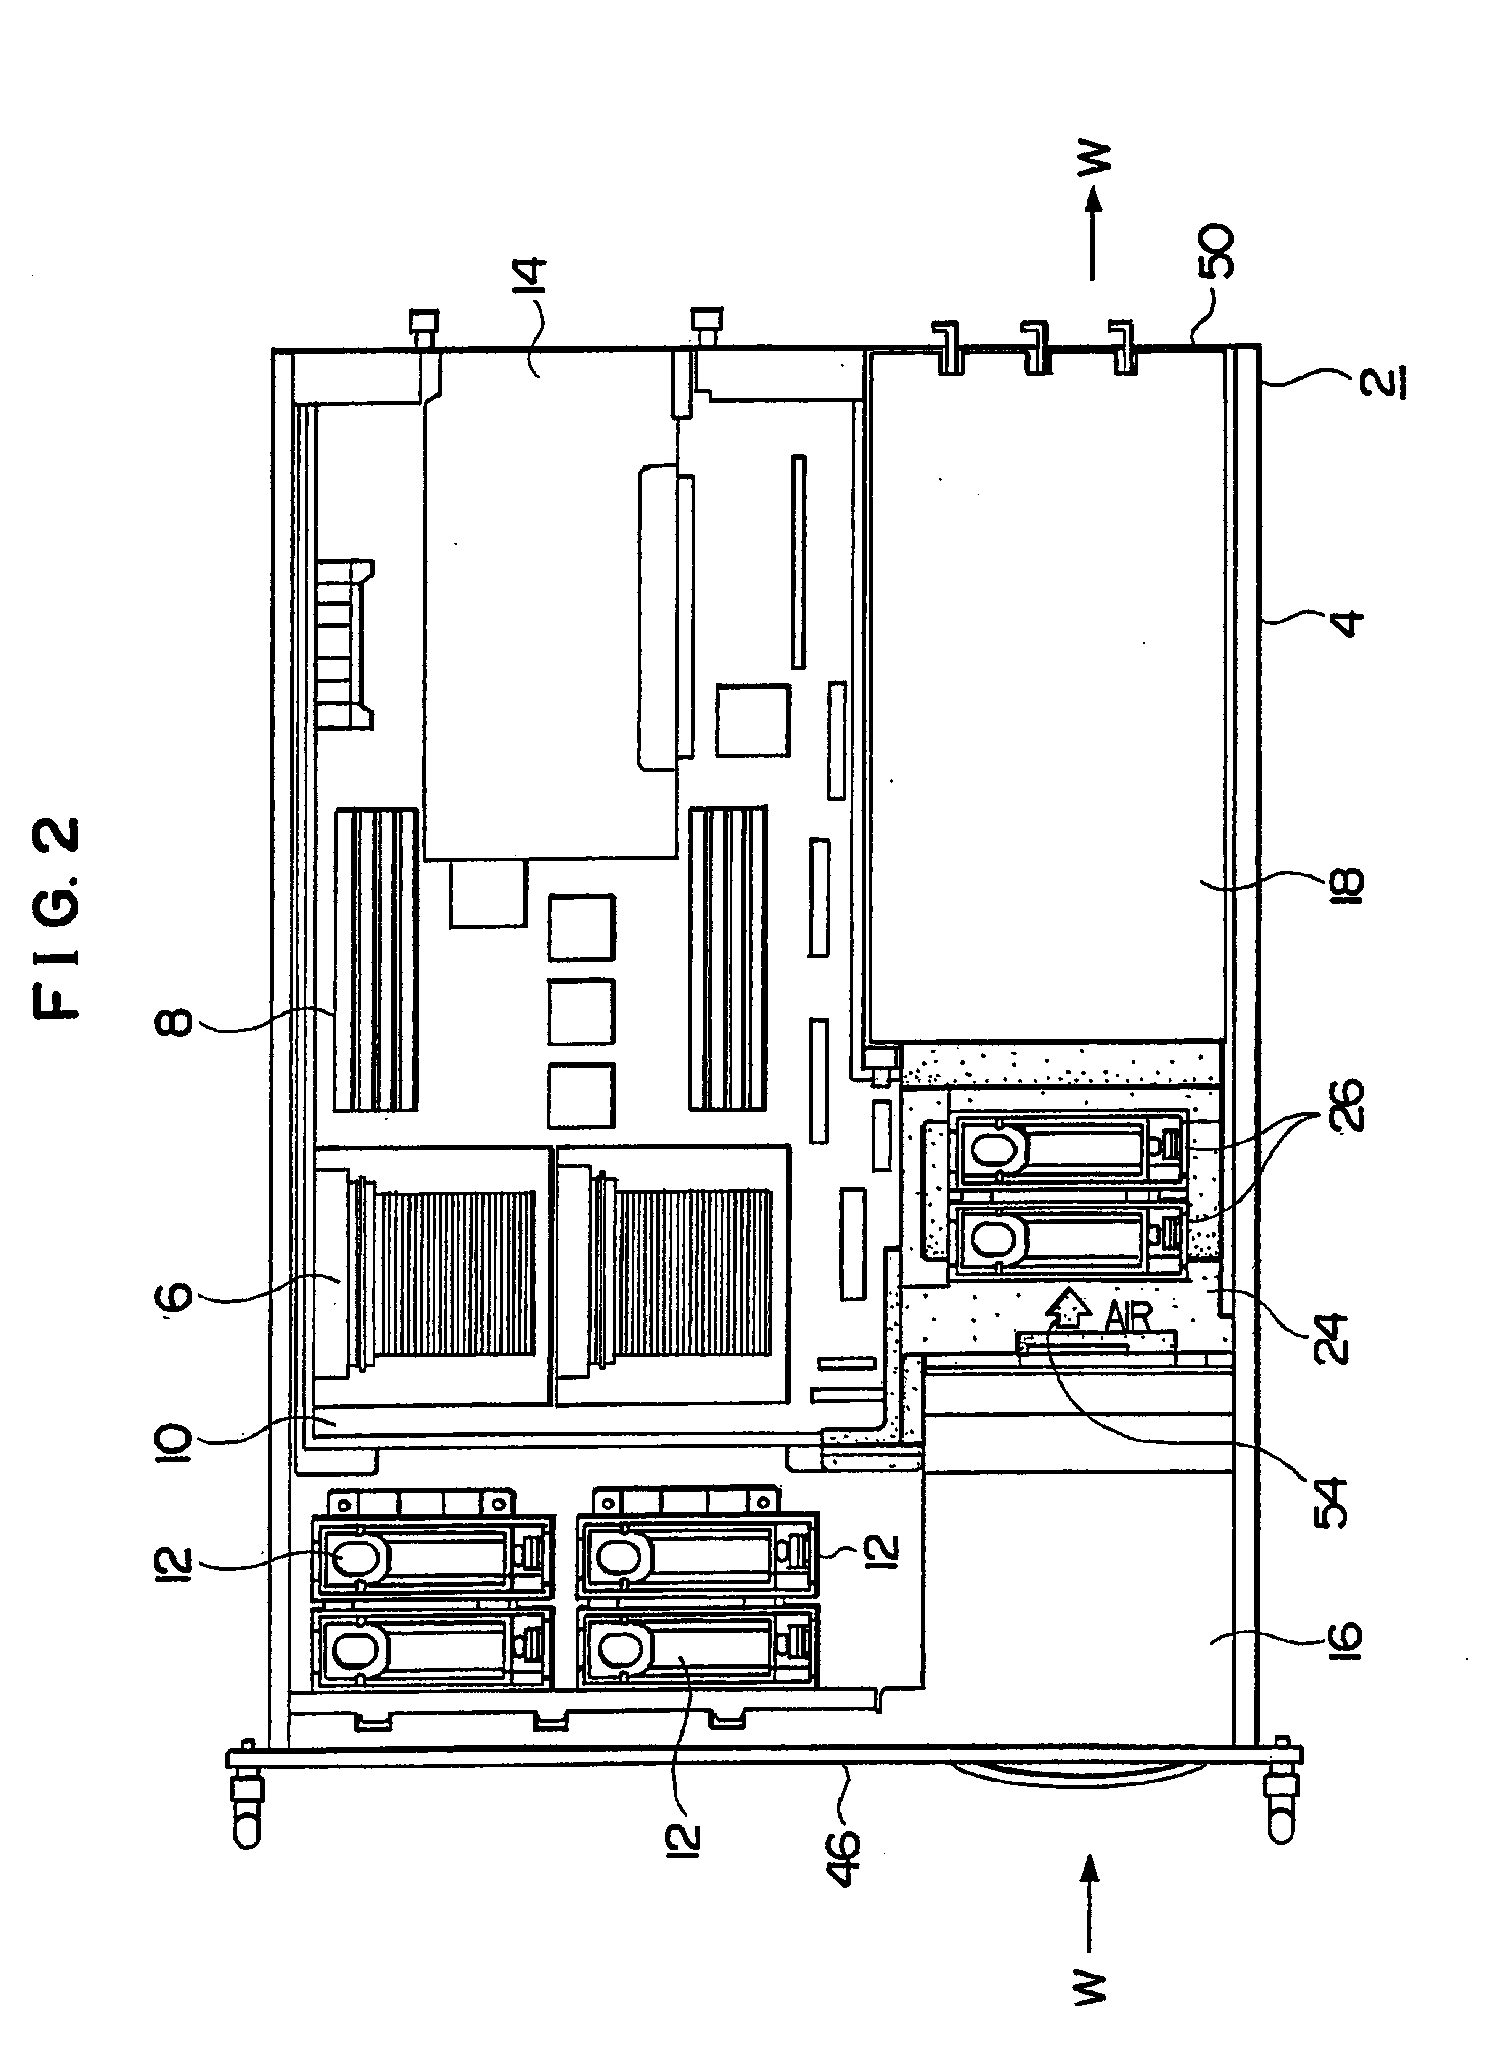 Air duct and electronic equipment using the air duct